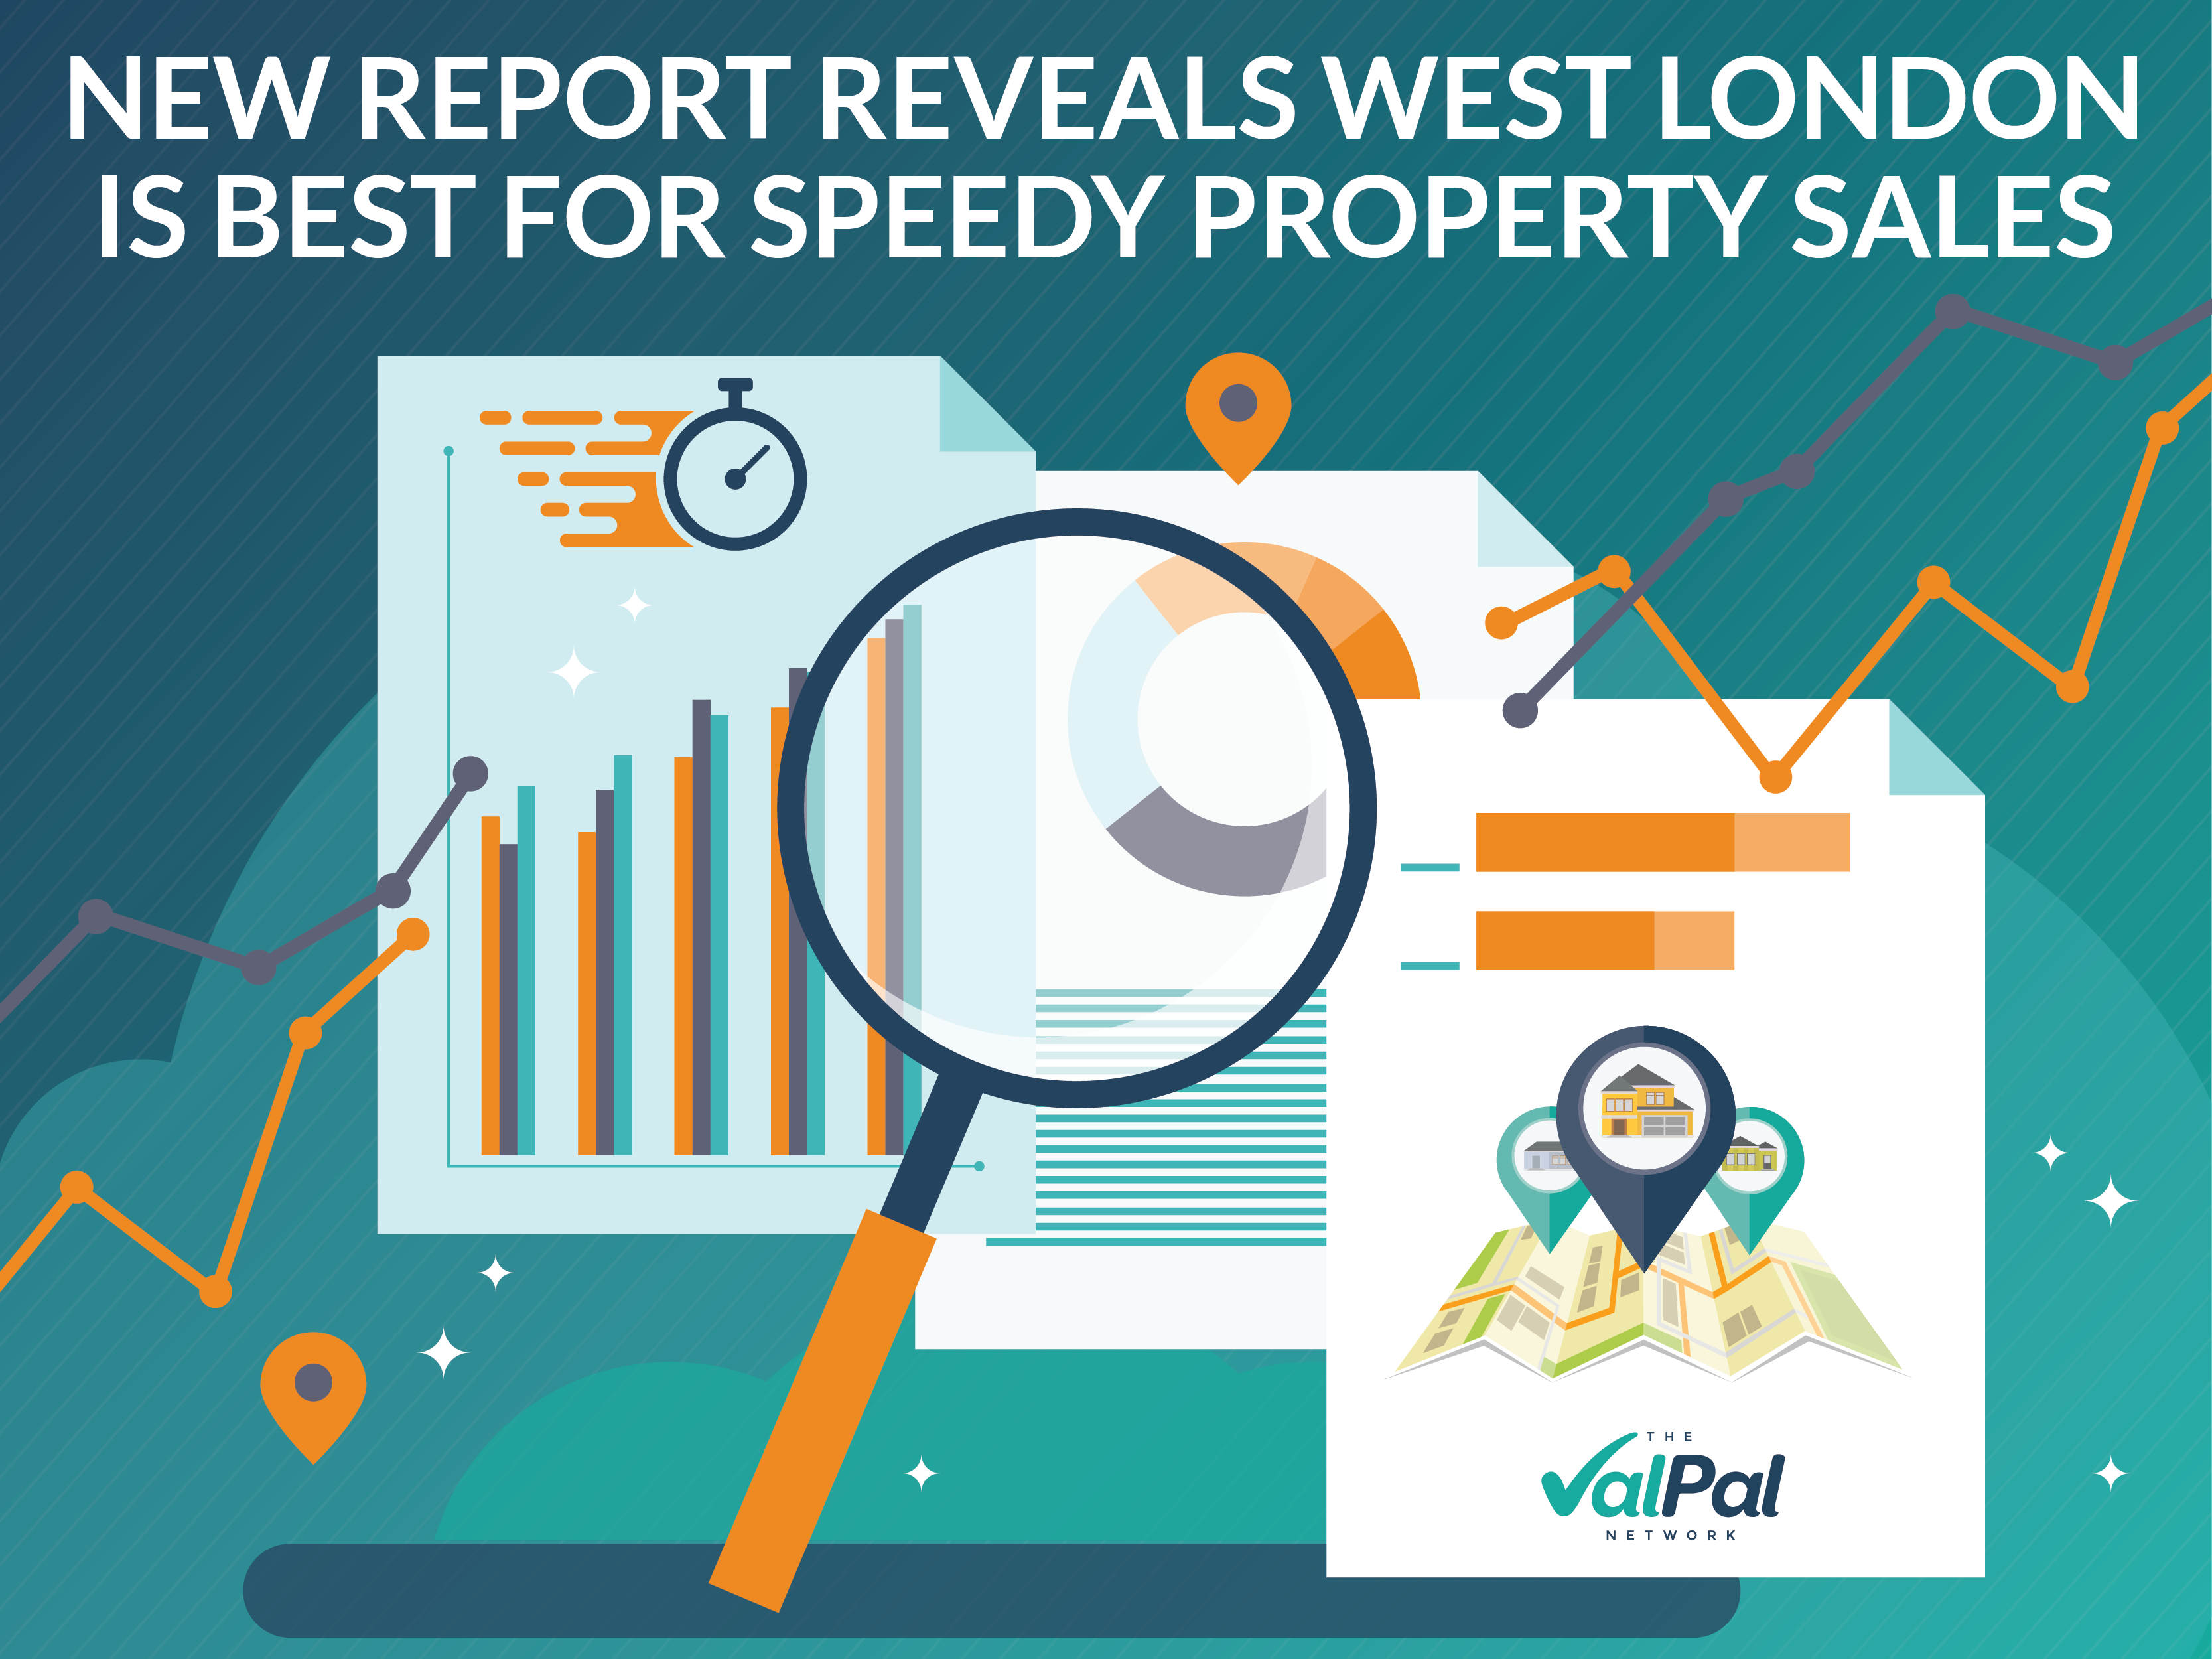 New Report Reveals West London is Best for Speedy Property Sales